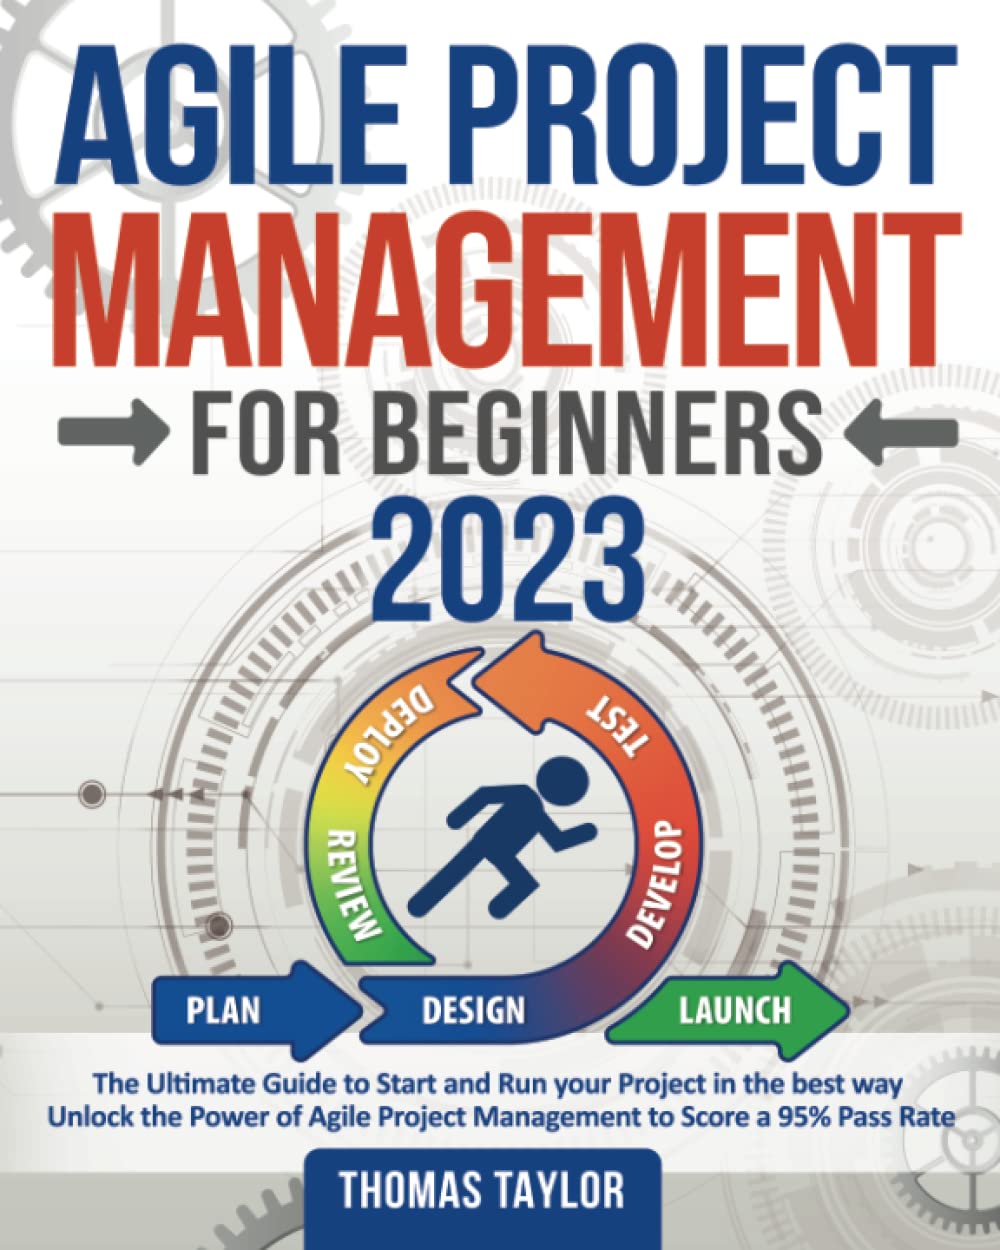 Agile Project Management for Beginners 2023: The Ultimate Guide to Start and Run your Project in the best way | Unlock the Power of Agile Project Management to Score a 95% Pass Rate